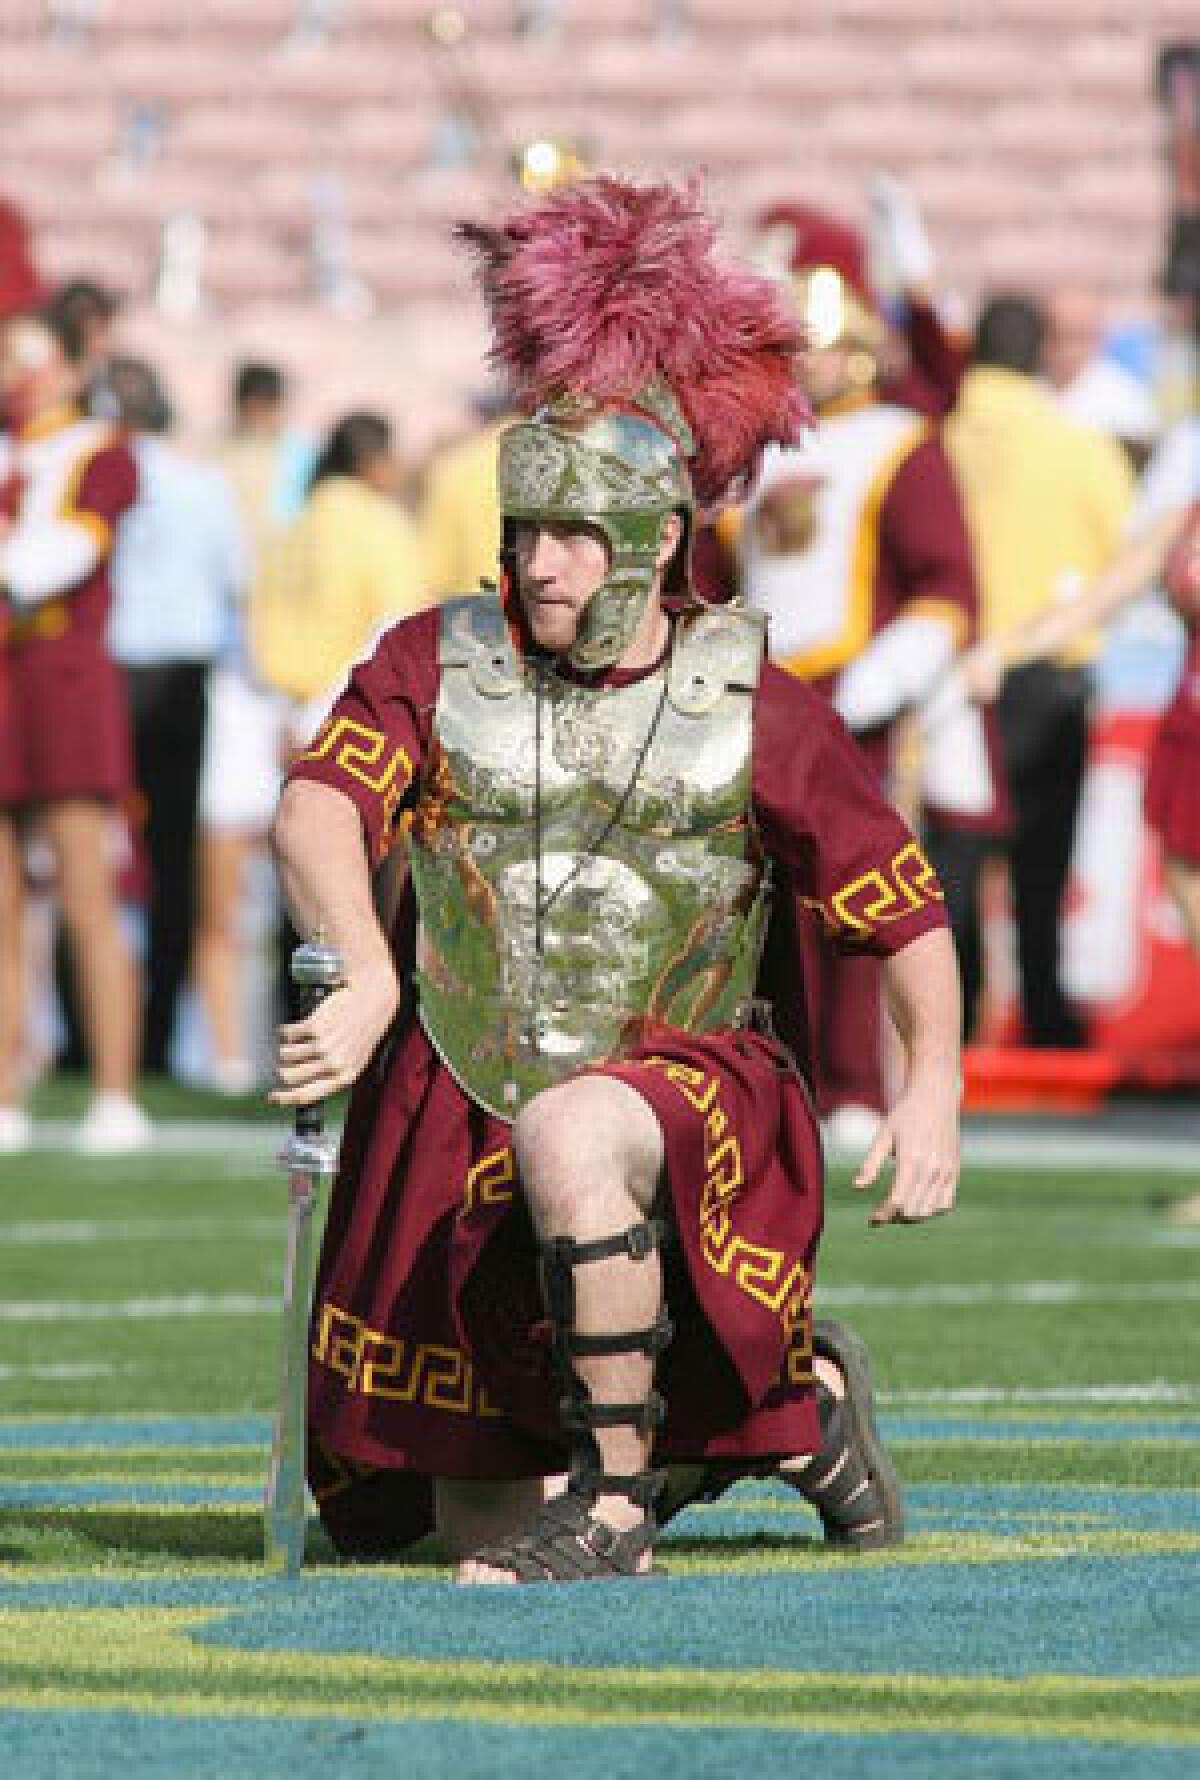 Drum major Ed Carden of USC places a sword in midfield before the game against the UCLA Bruins on Dec. 6, 2008.